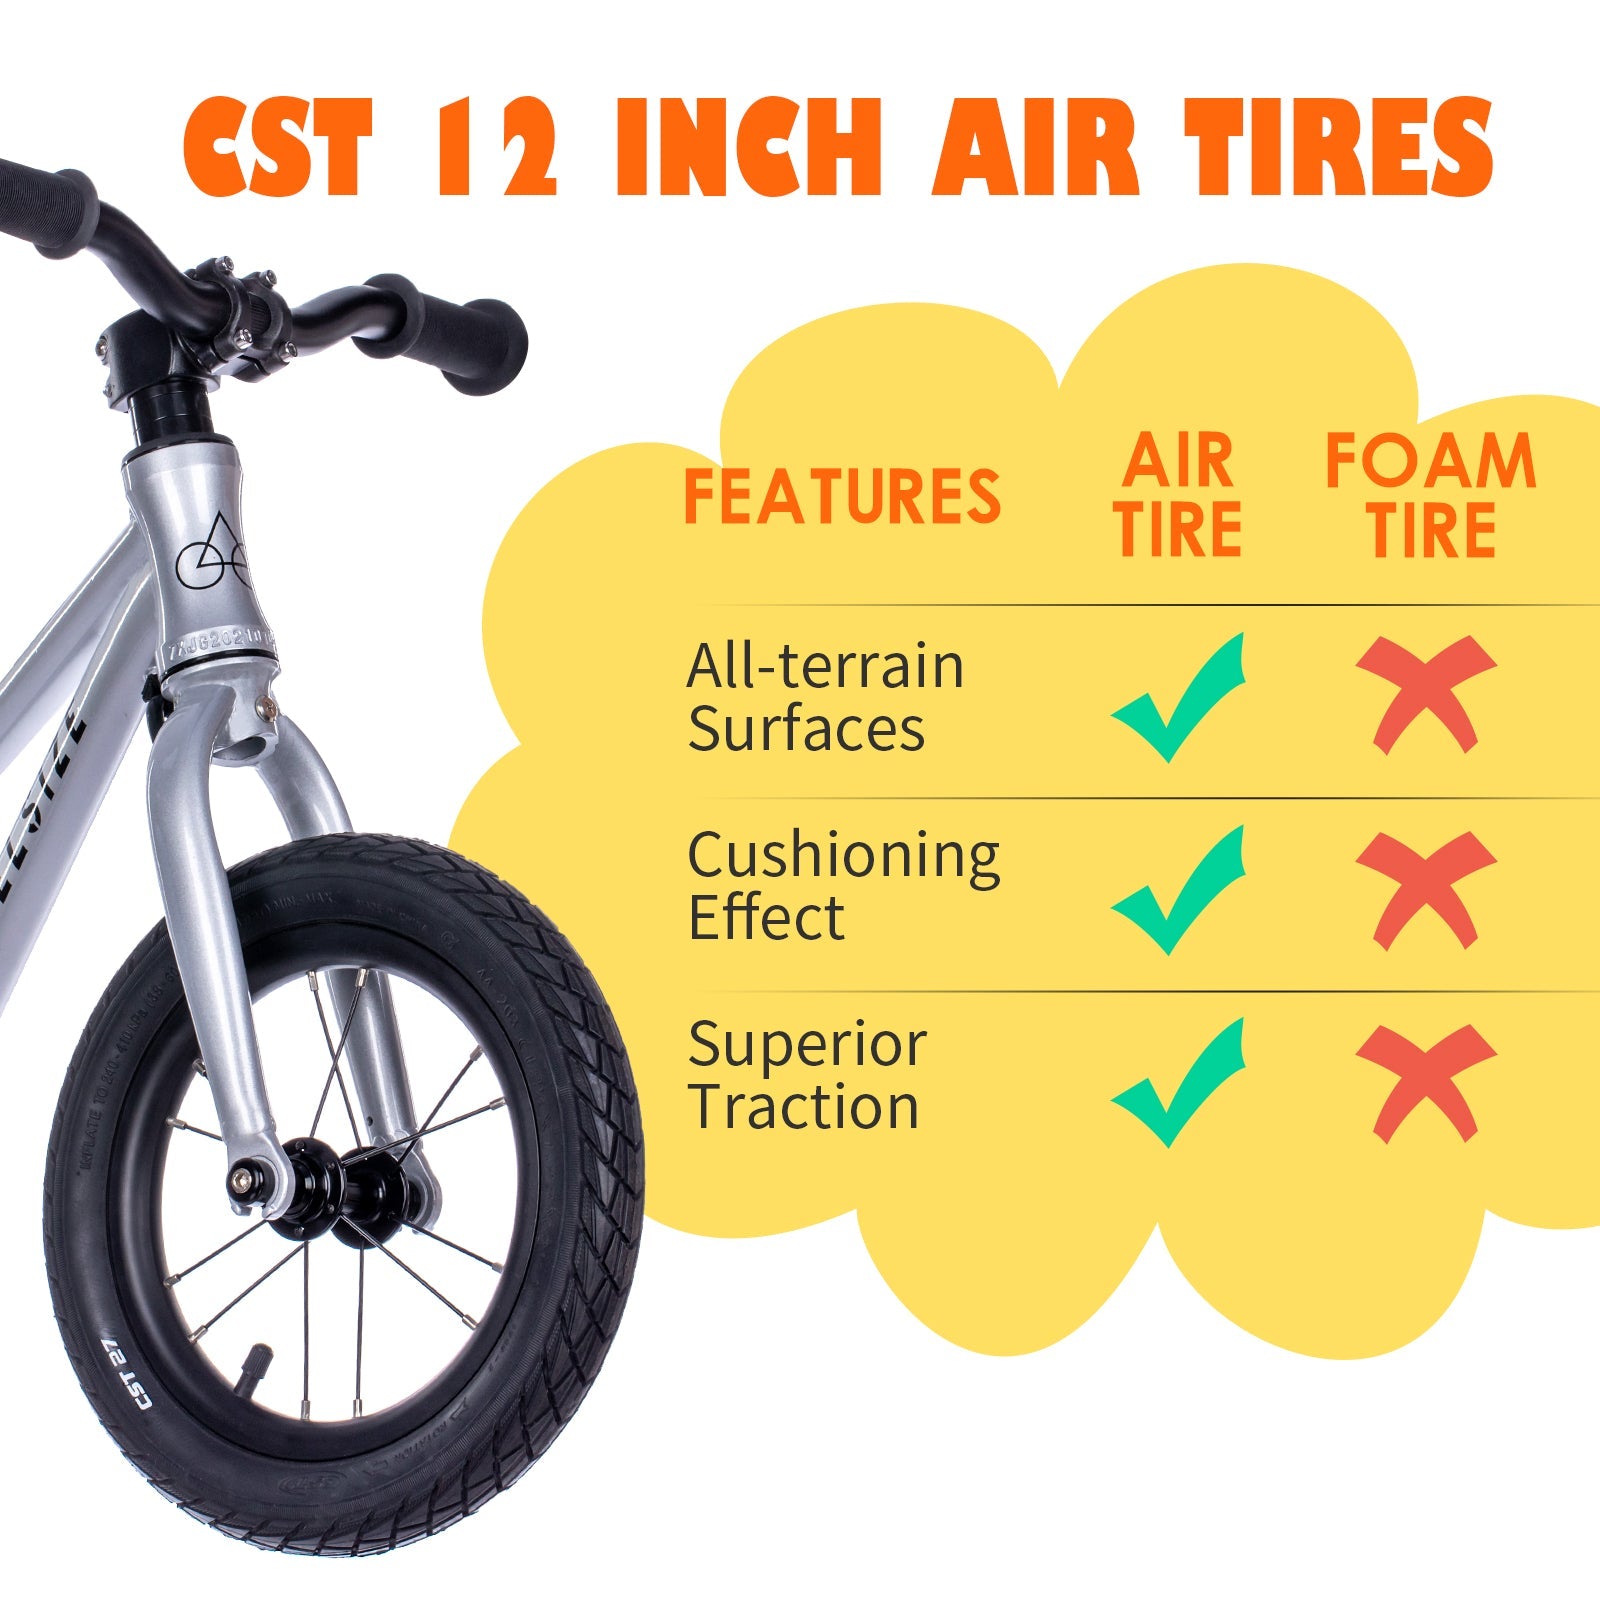 12-inch Balance Bike - Belsize Official Sporting Goods > Outdoor Recreation > Cycling > Bicycles